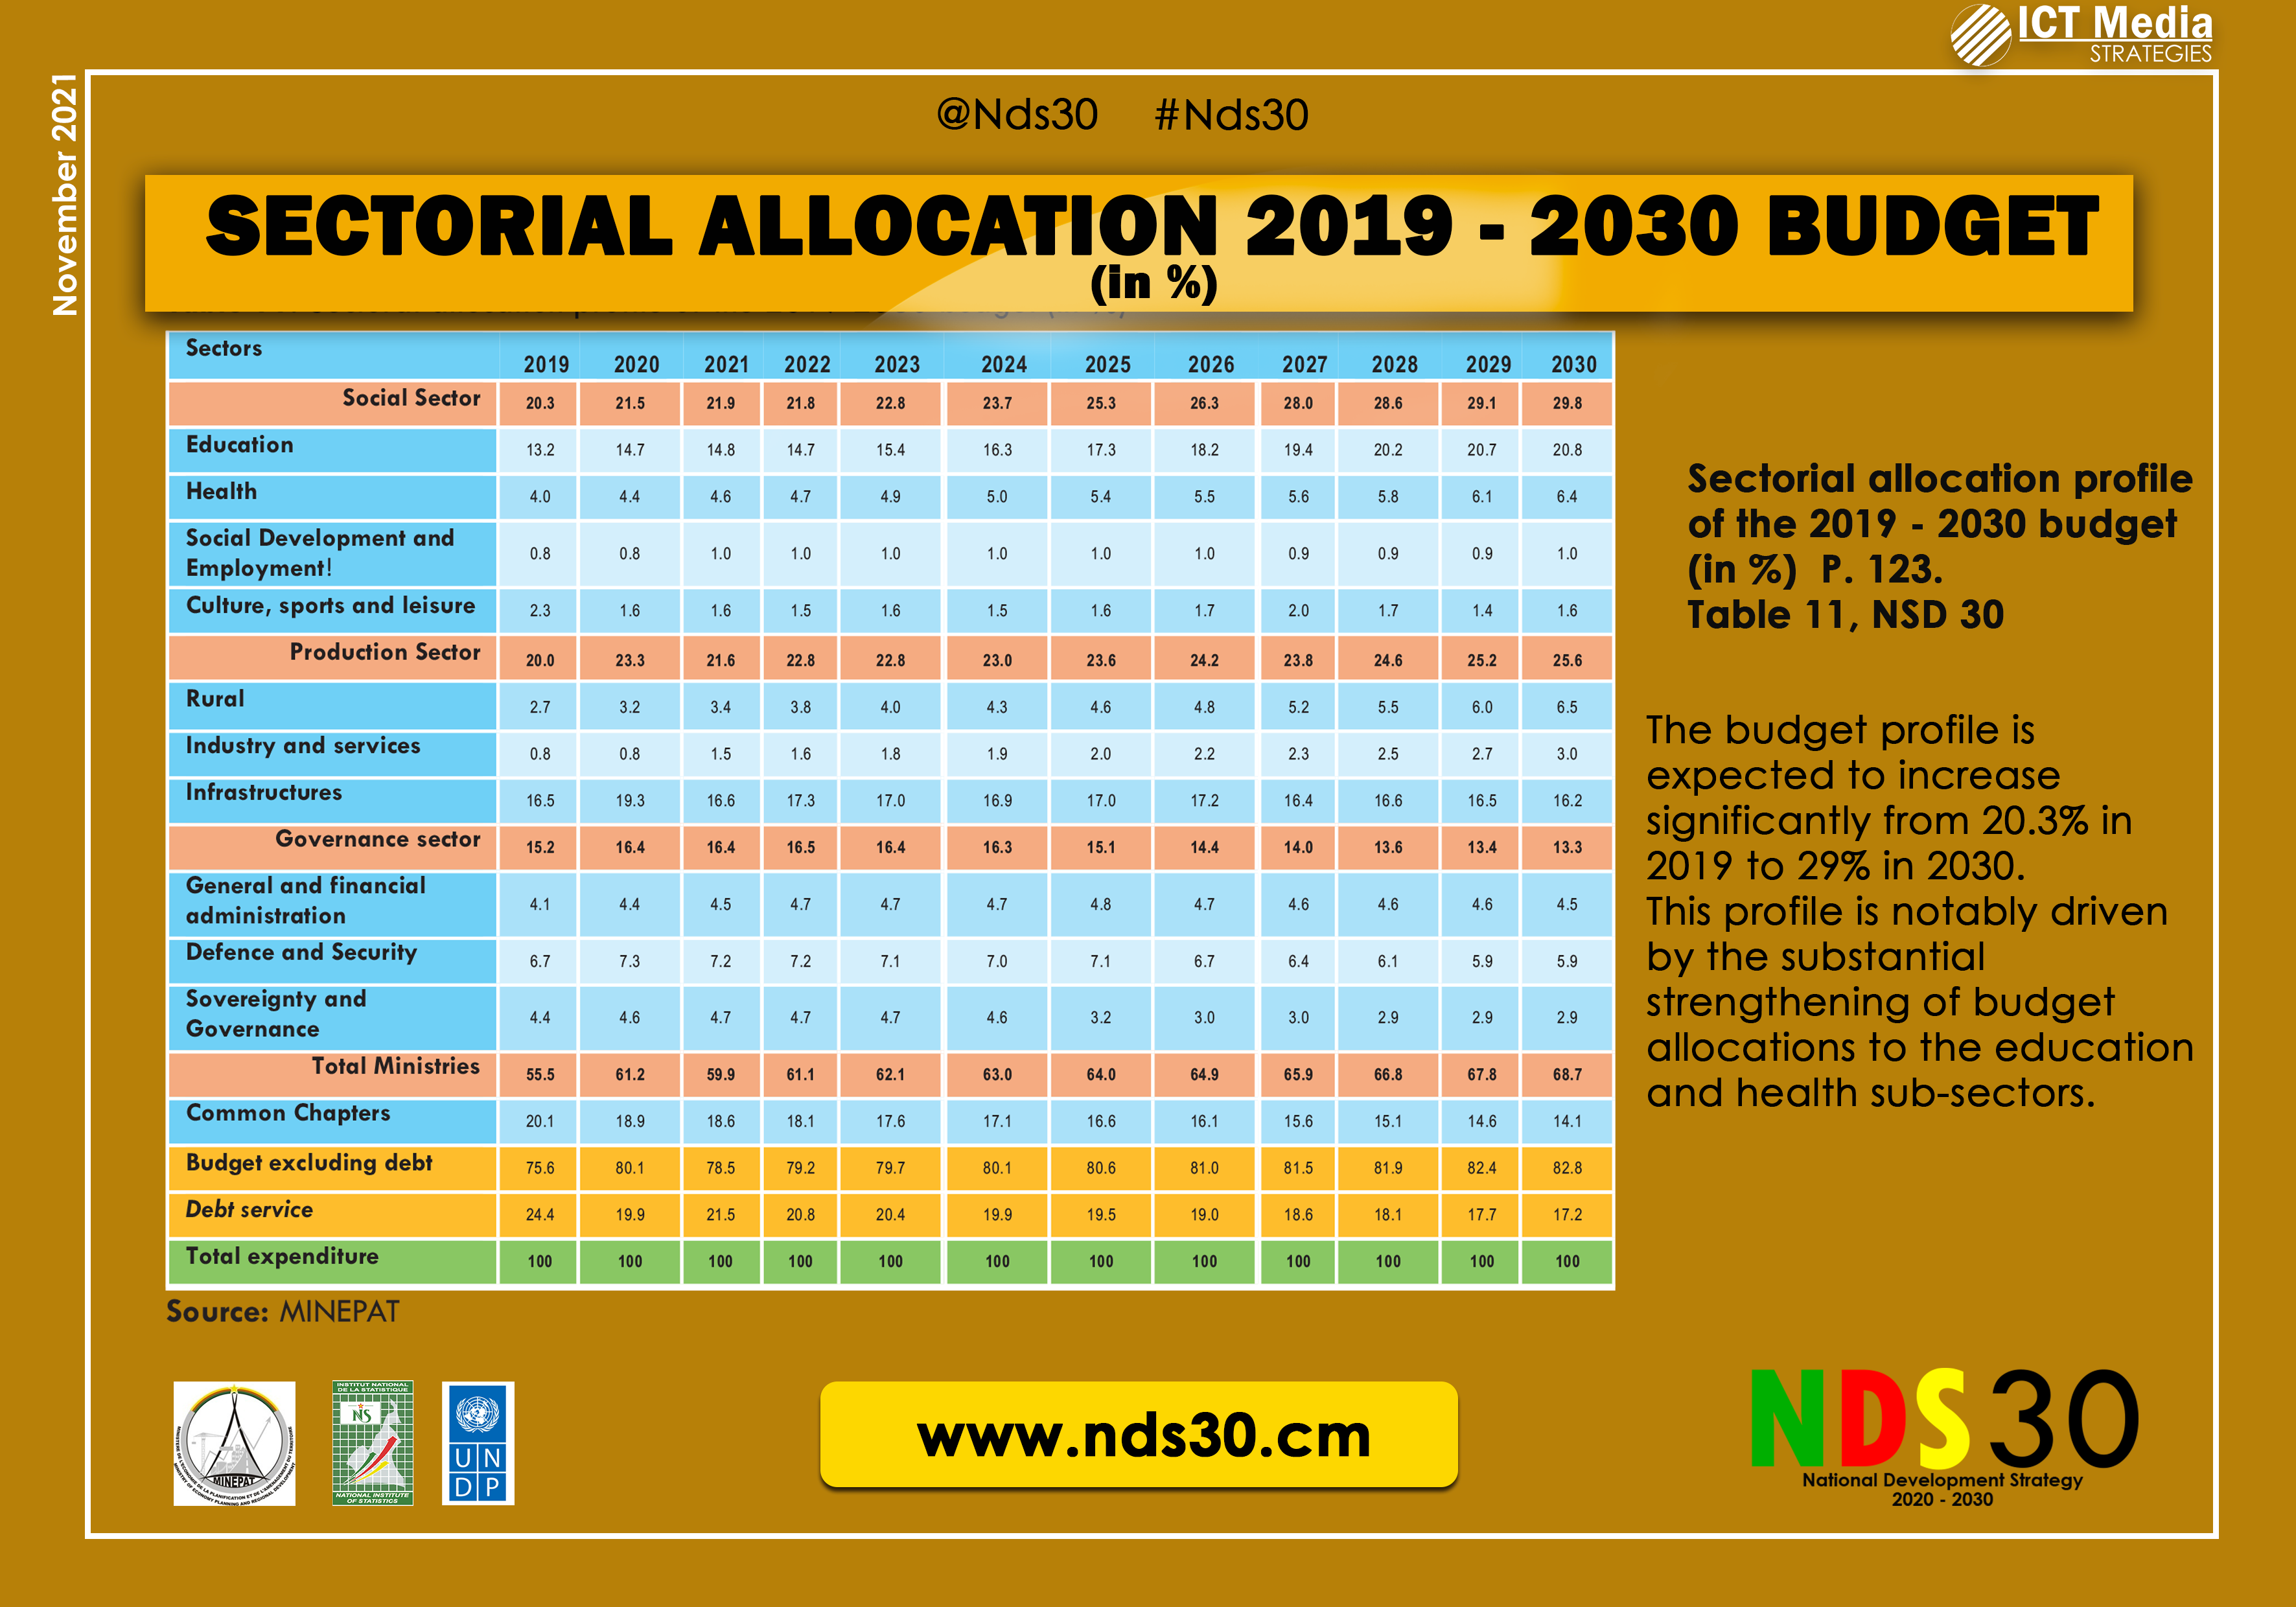 Table 11 budget allocations by sector in the NDS 30